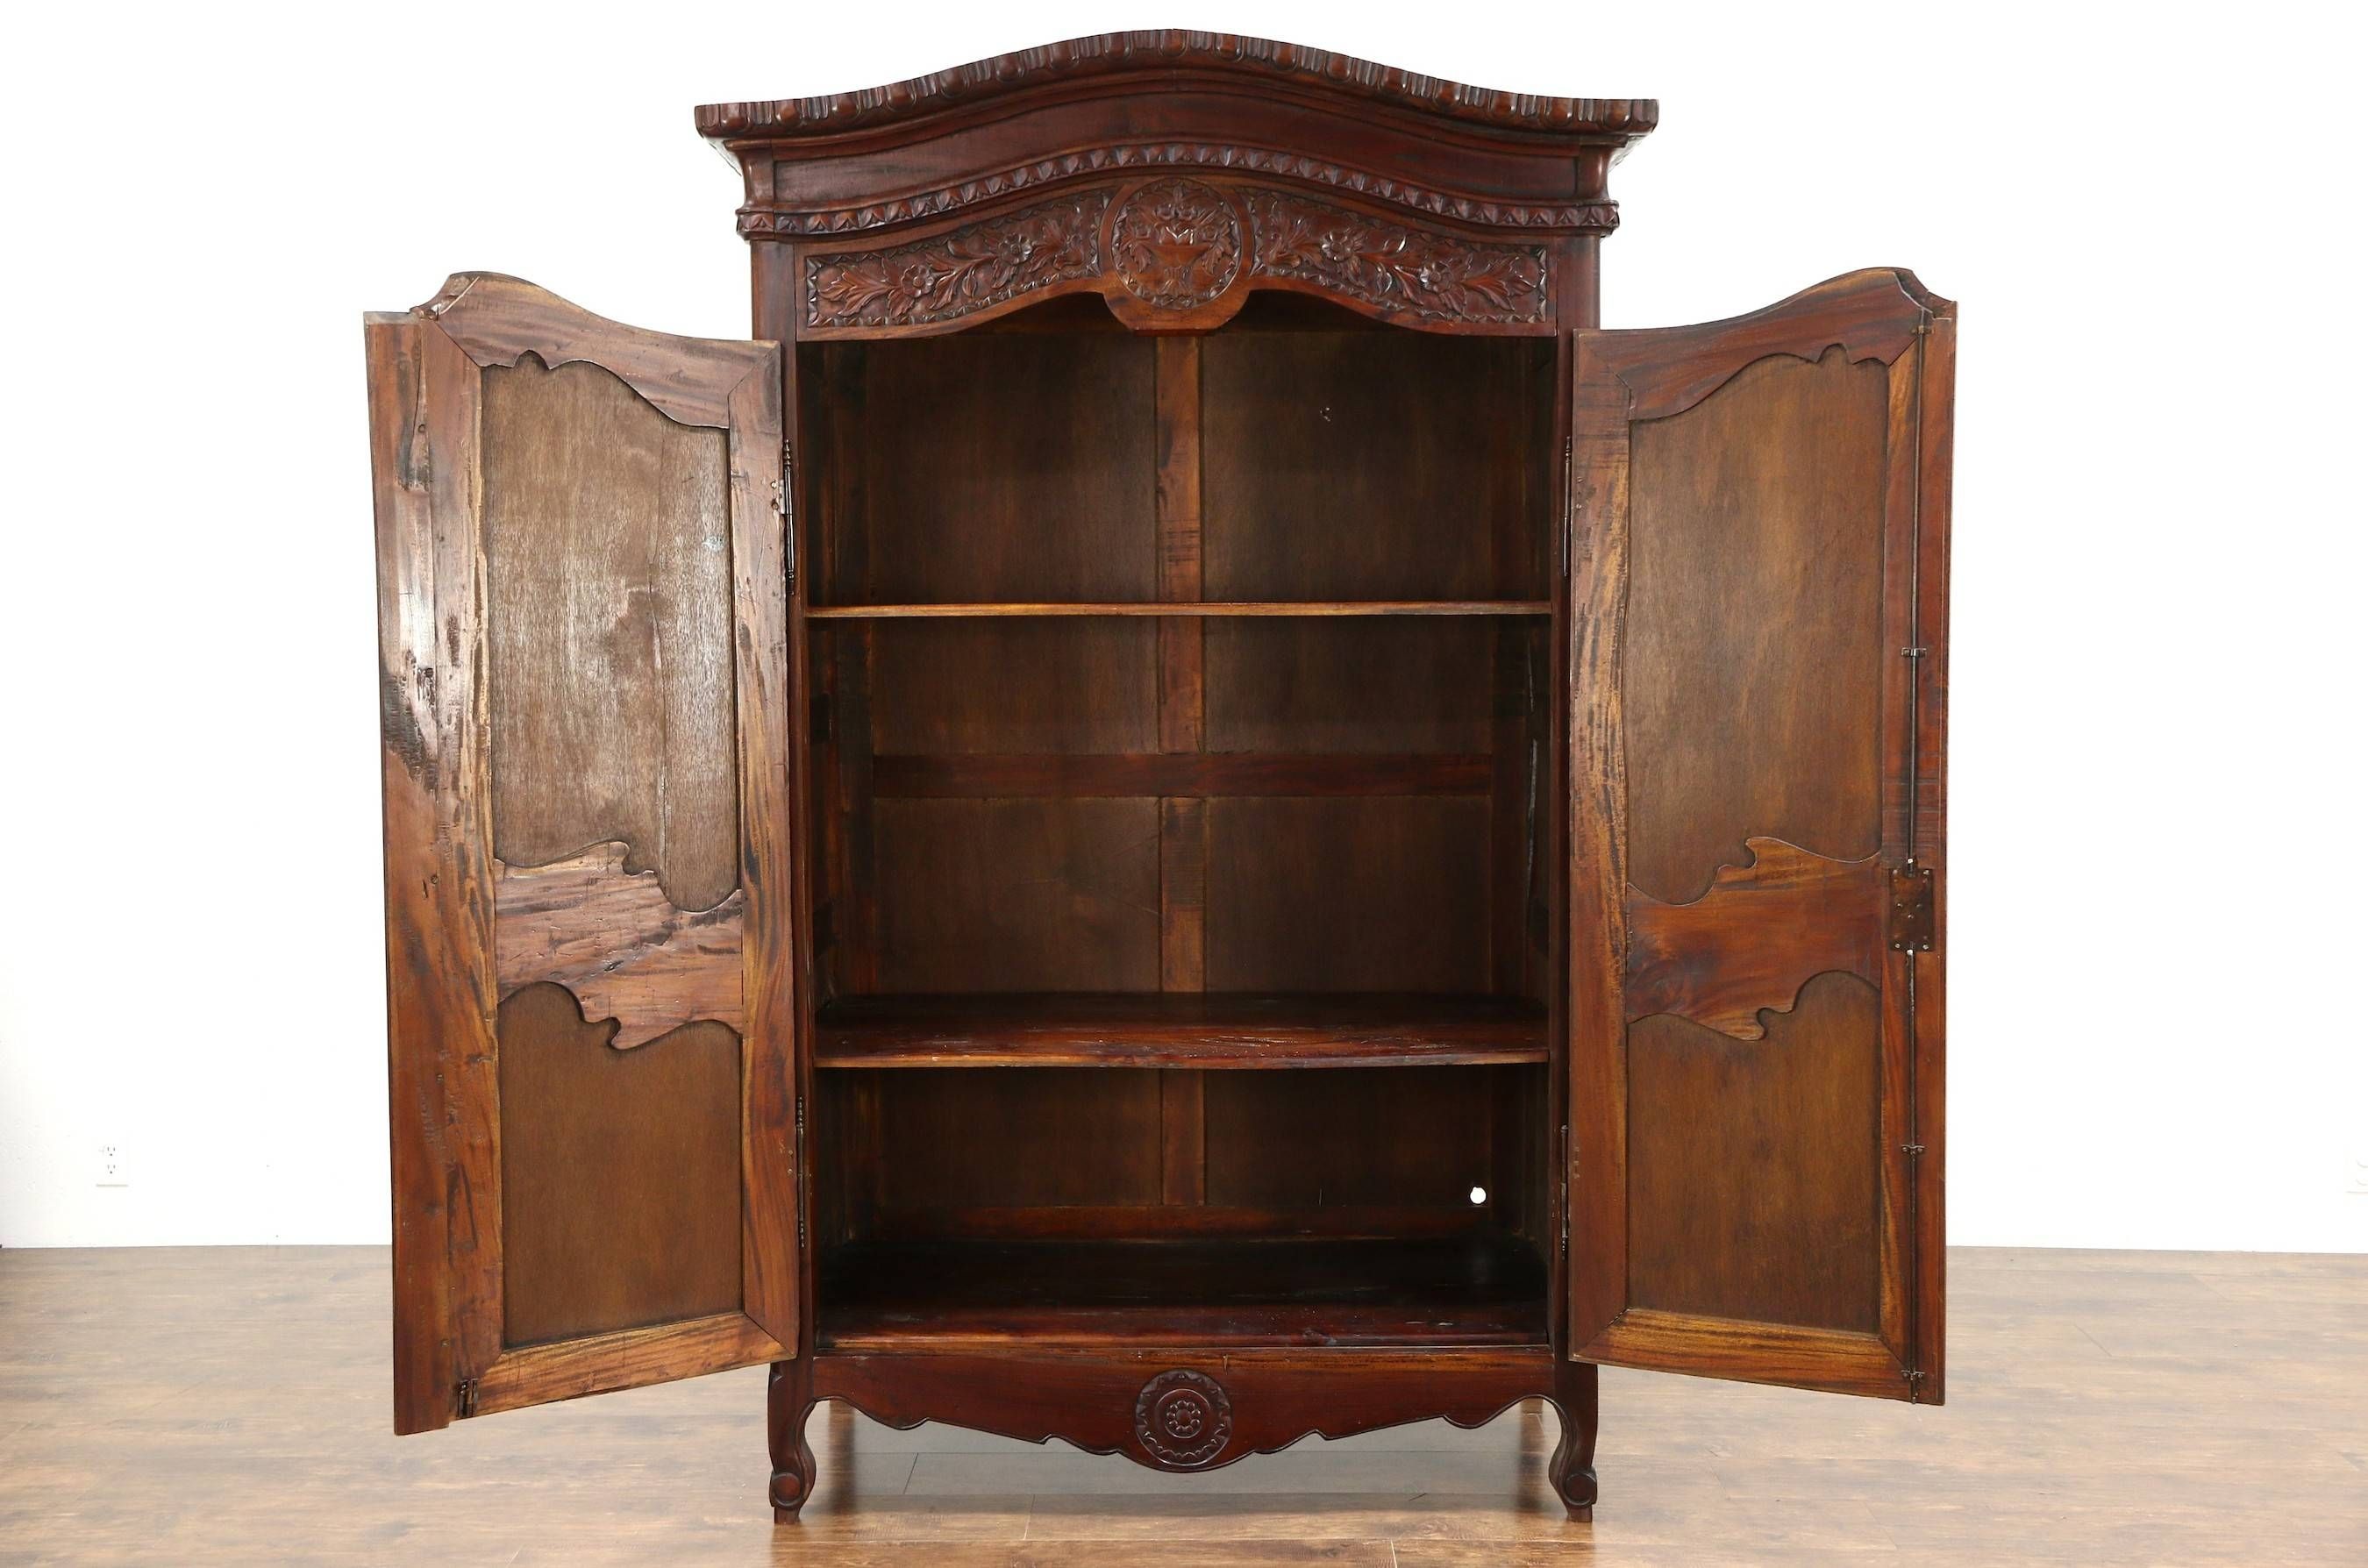 Sold – French Style Hand Carved Mahogany Vintage Armoire, Wardrobe Pertaining To French Style Armoires Wardrobes (View 14 of 15)